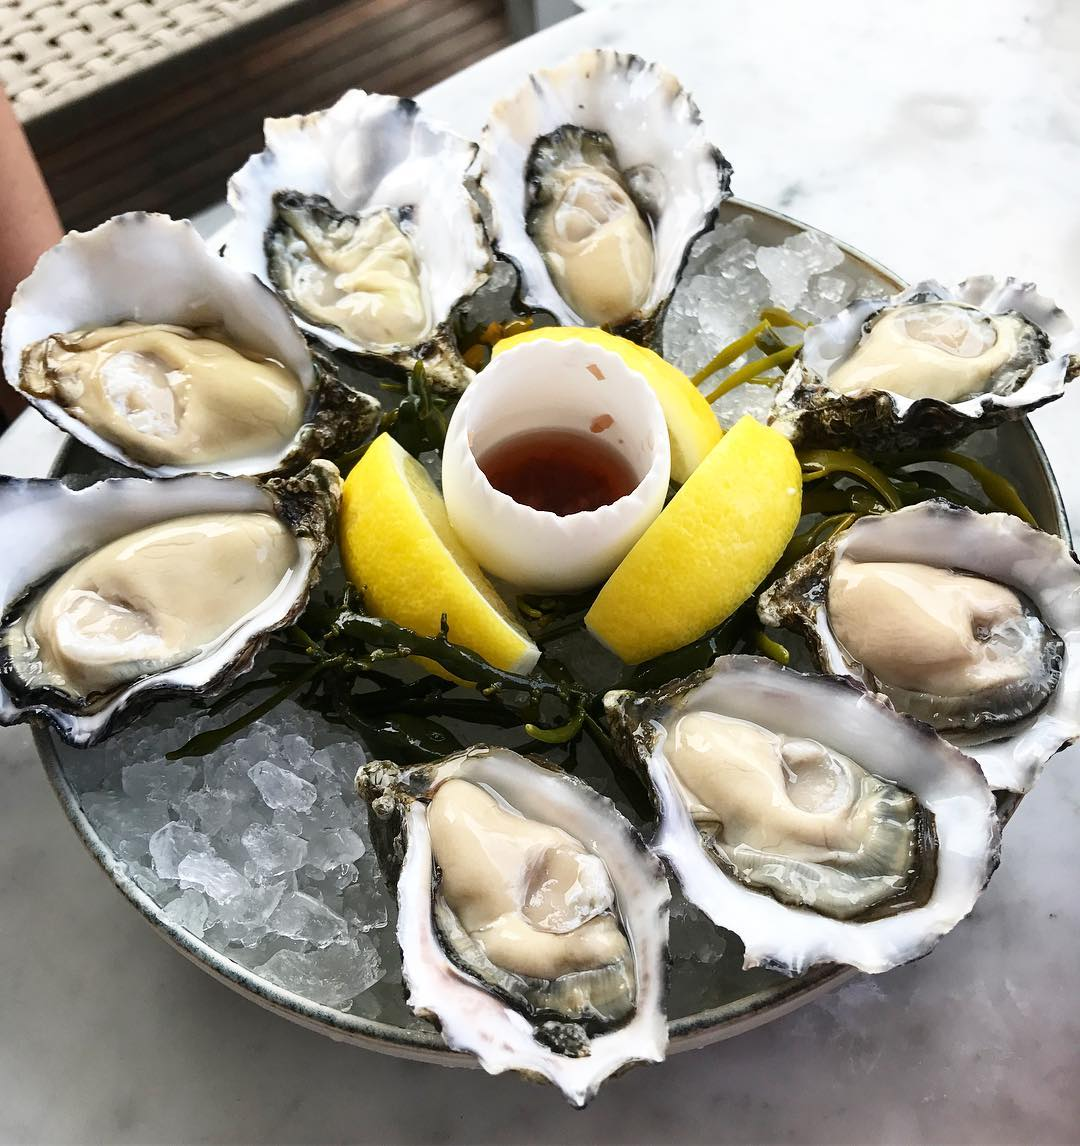 angie's oyster bar singapore $1 oysters